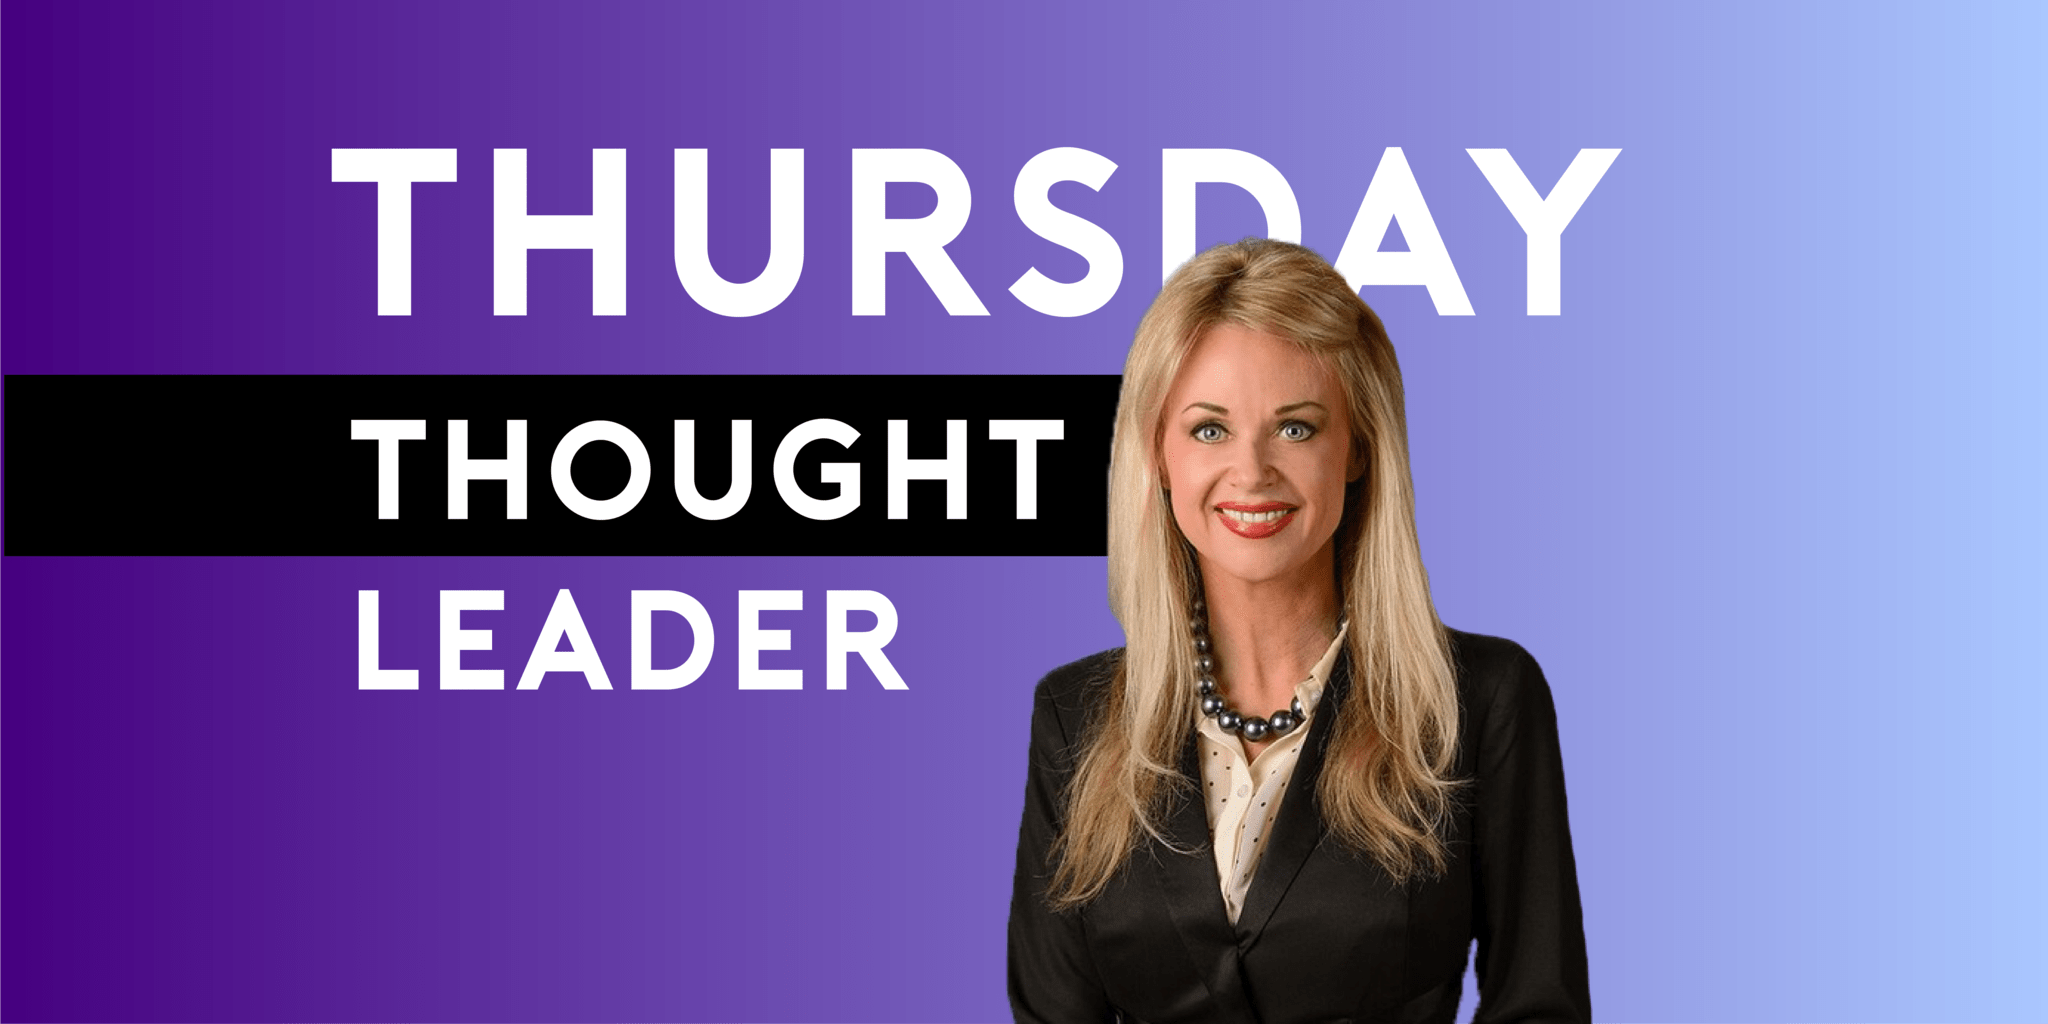 Janet Brooks Holmes of The McKay Firm is LegalNet Inc's Thursday Thought Leader